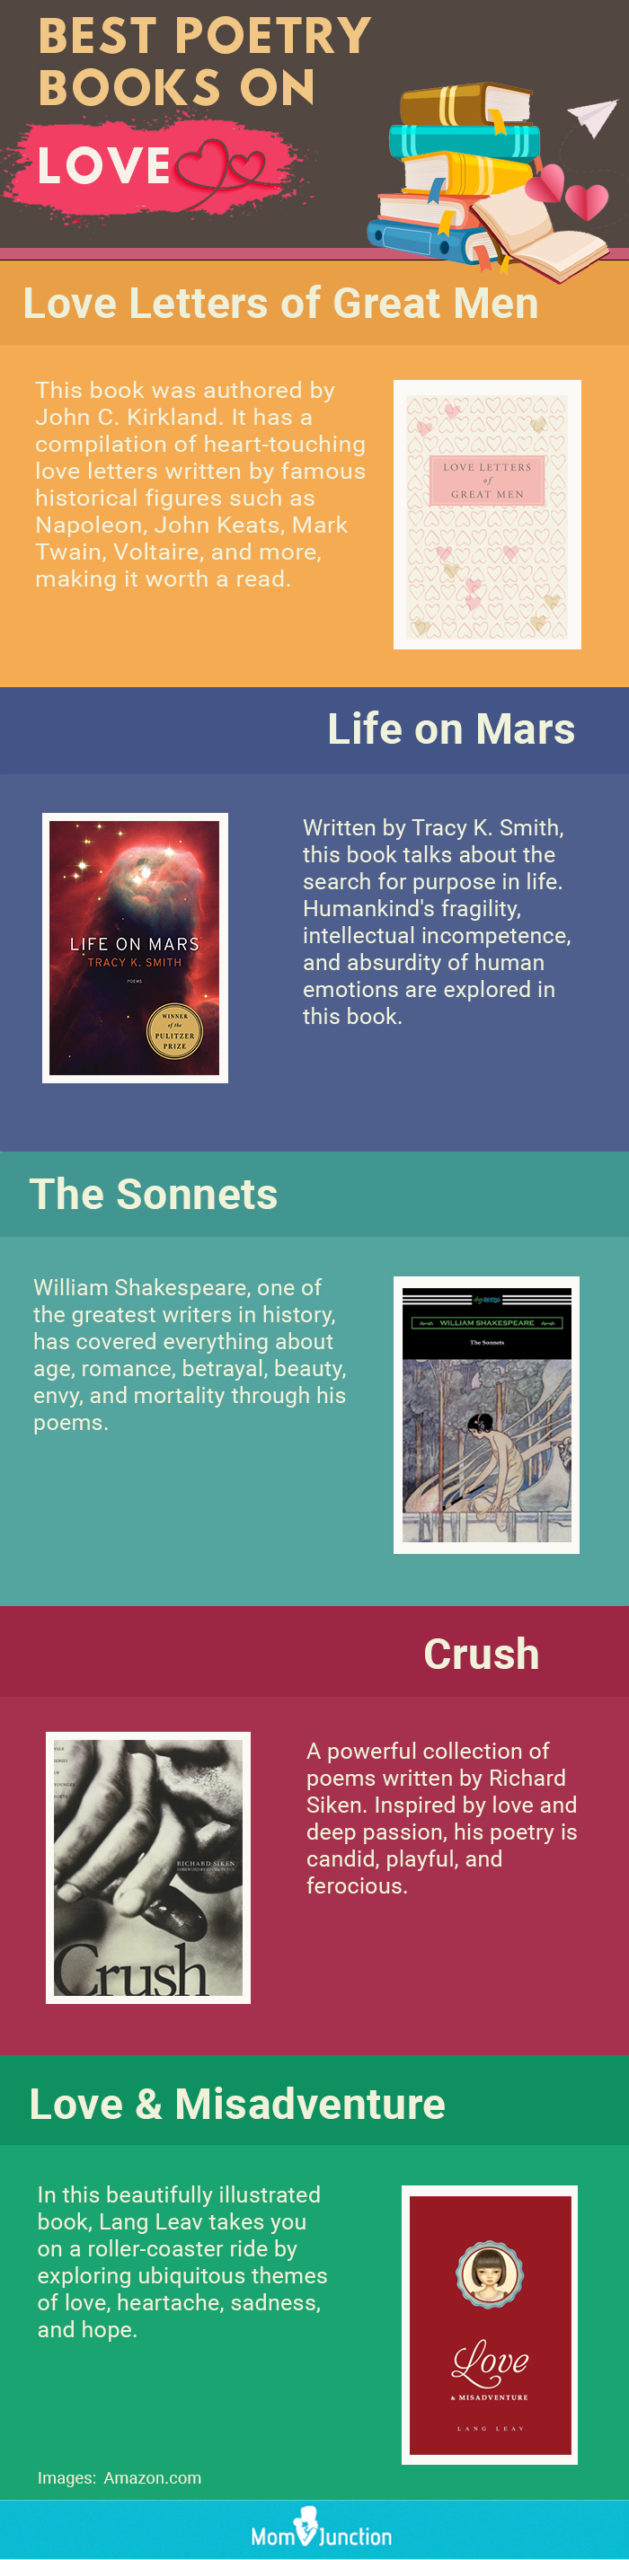 best poetry books on love (infographic)